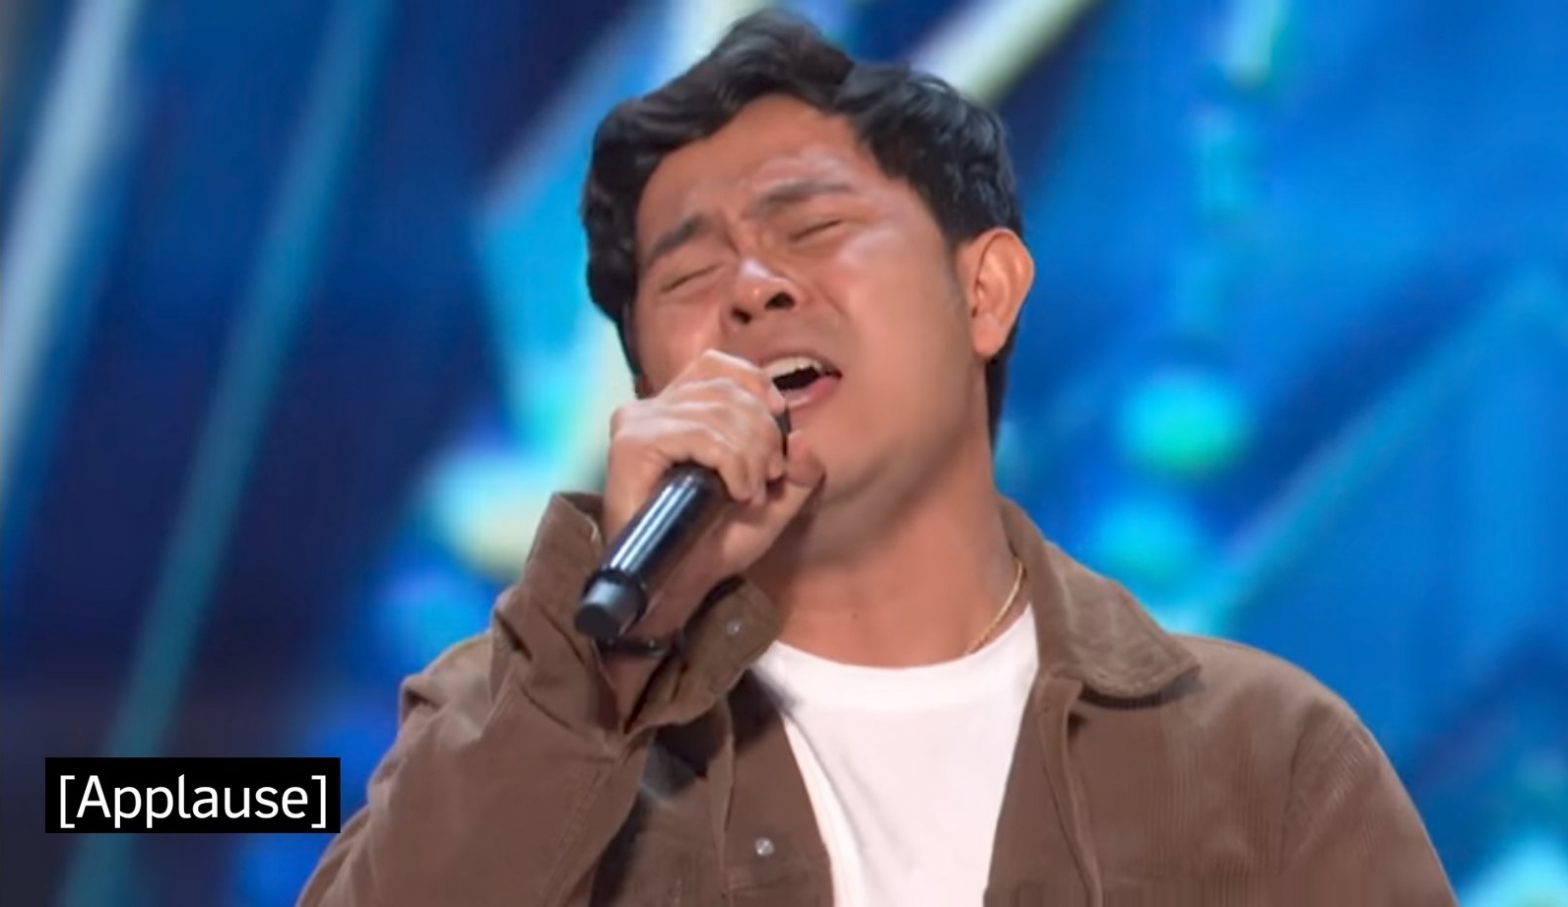 Who is Cakra Khan? America’s Got Talent contestant sings “Make It Rain” and “No Woman, No Cry”, impresses judges